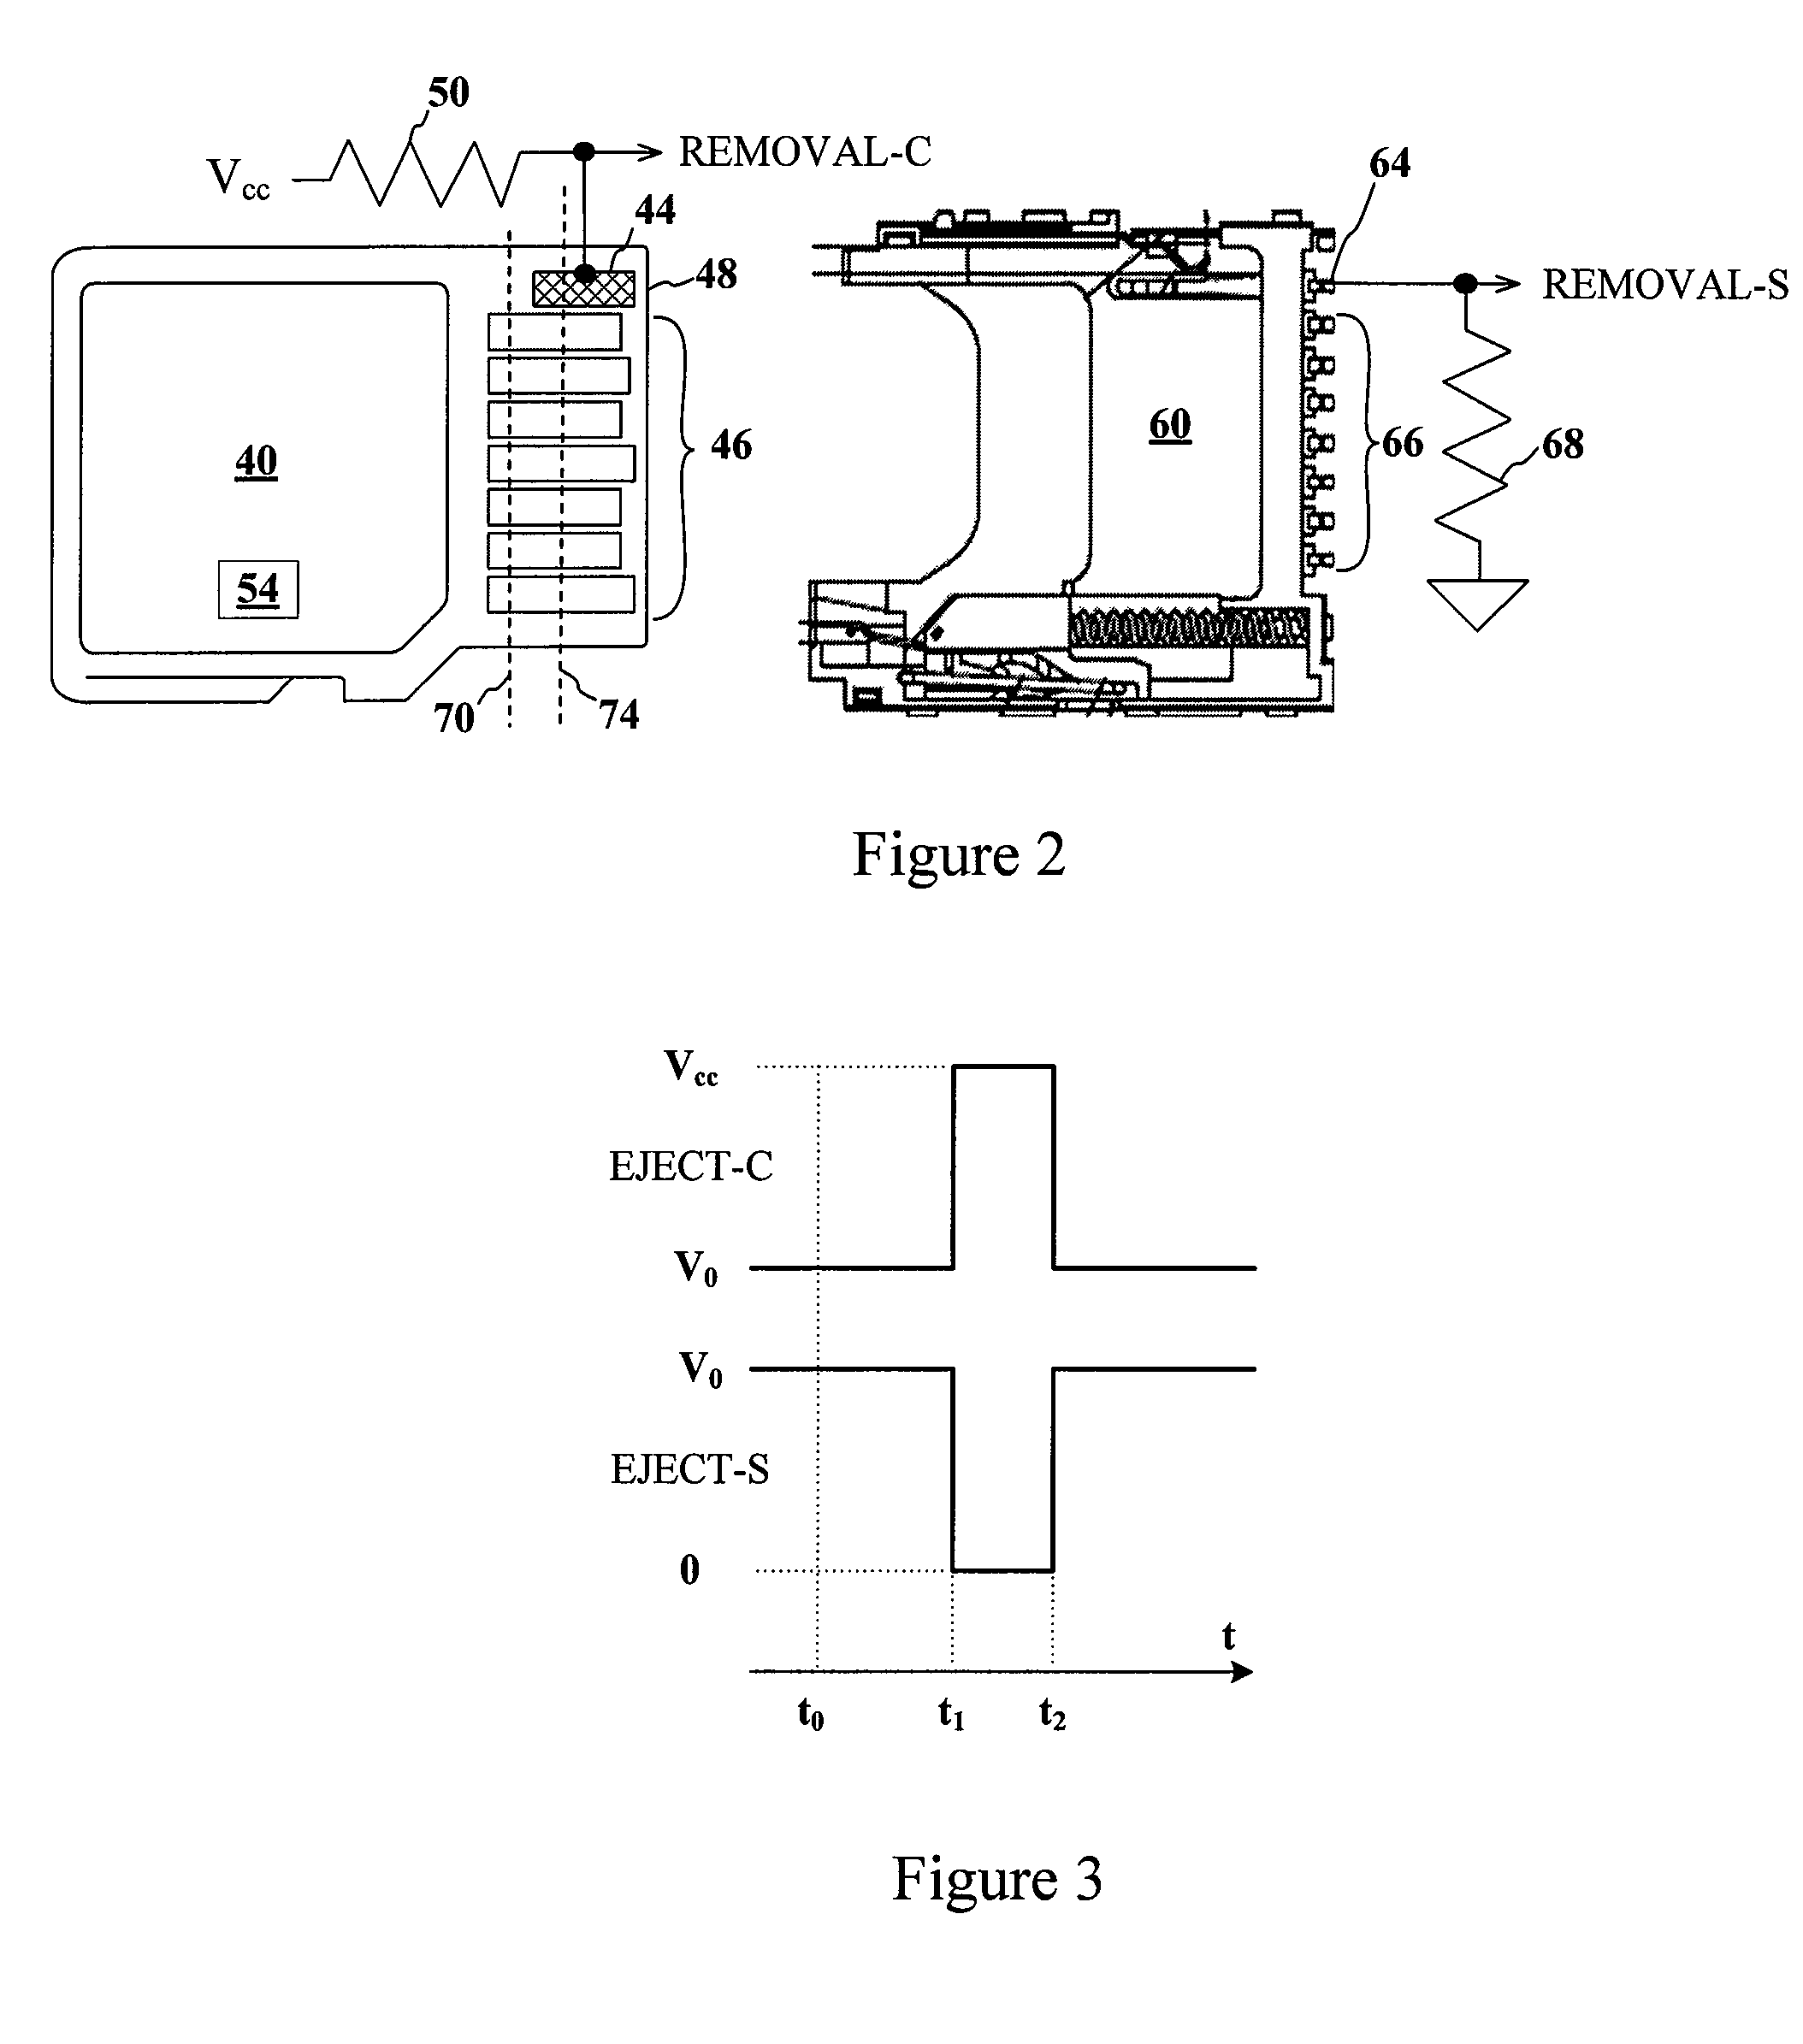 Advanced detection of memory device removal, and methods, devices and connectors